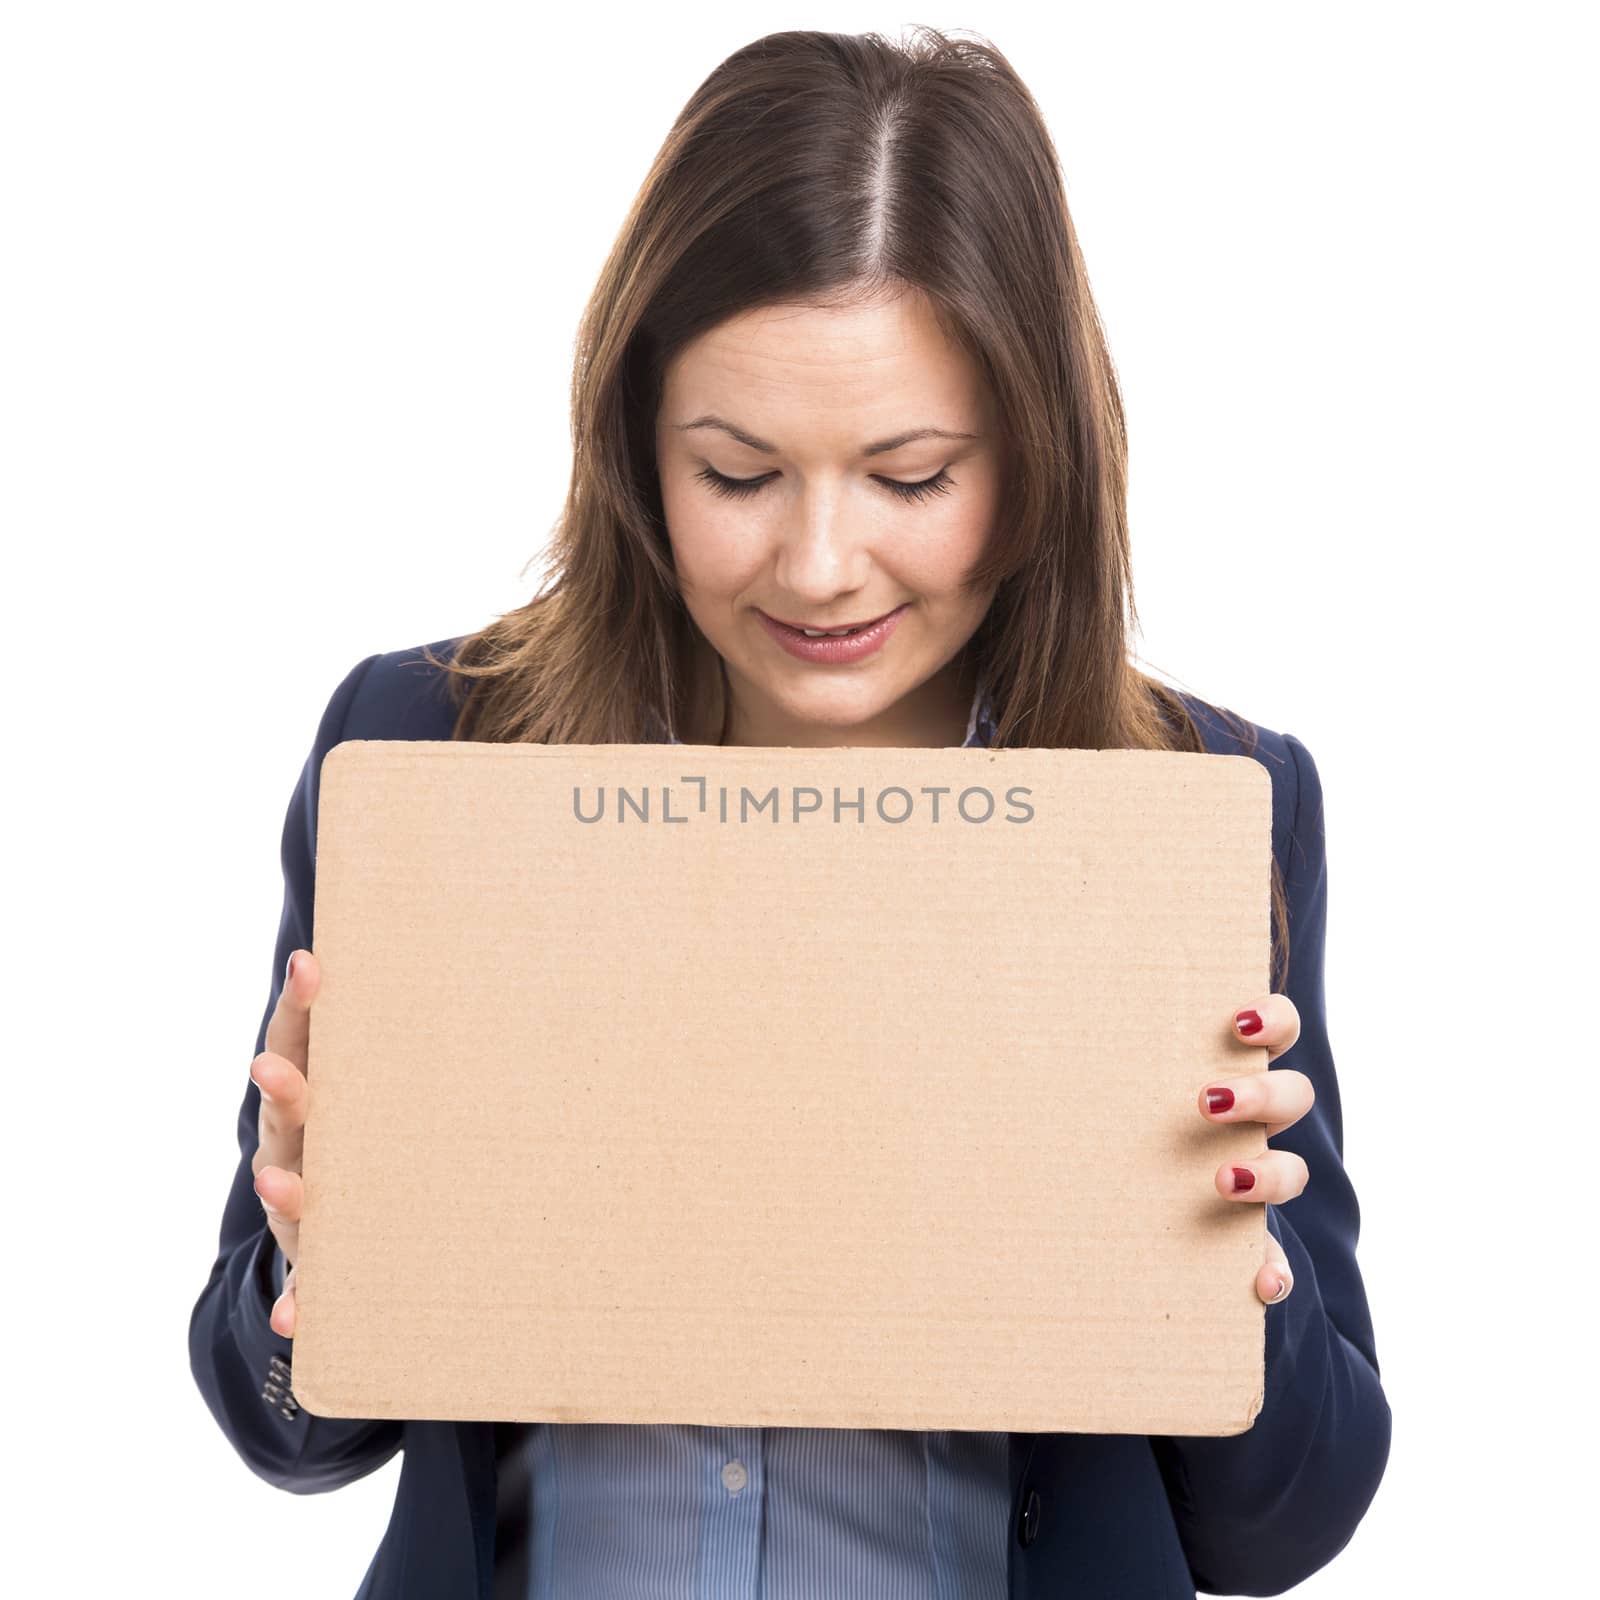 Business woman holding a cardboard by Iko